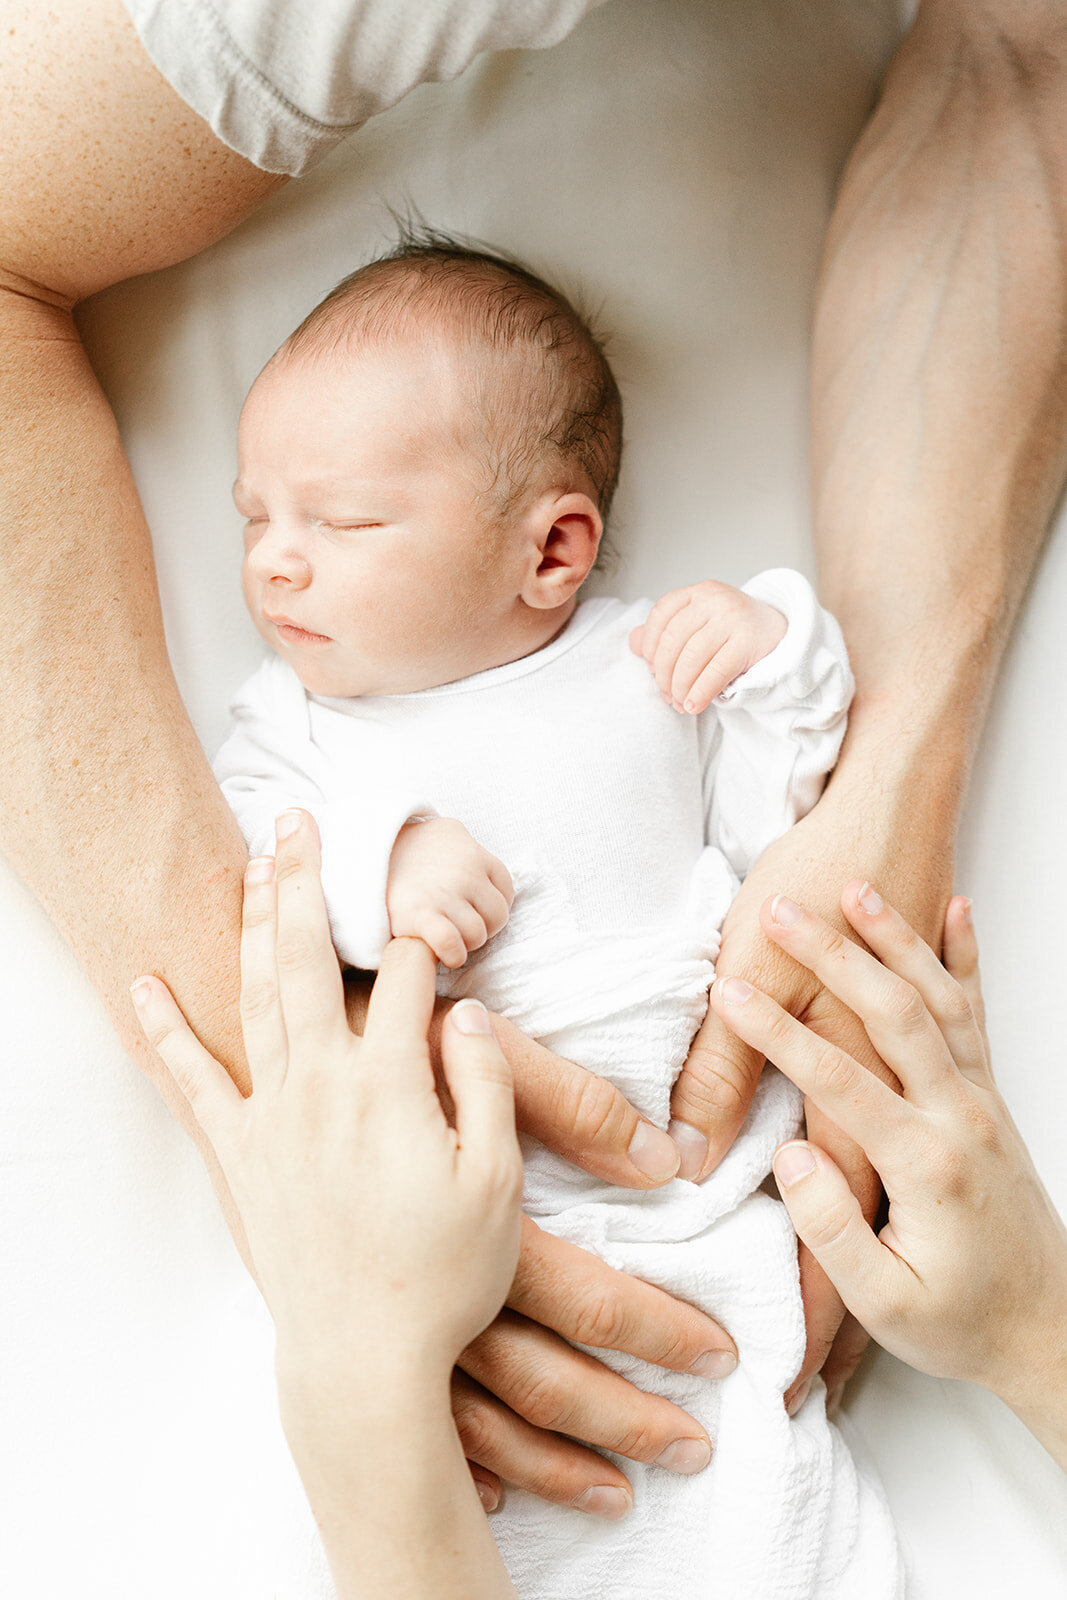 mom and dad have hands on newborn baby